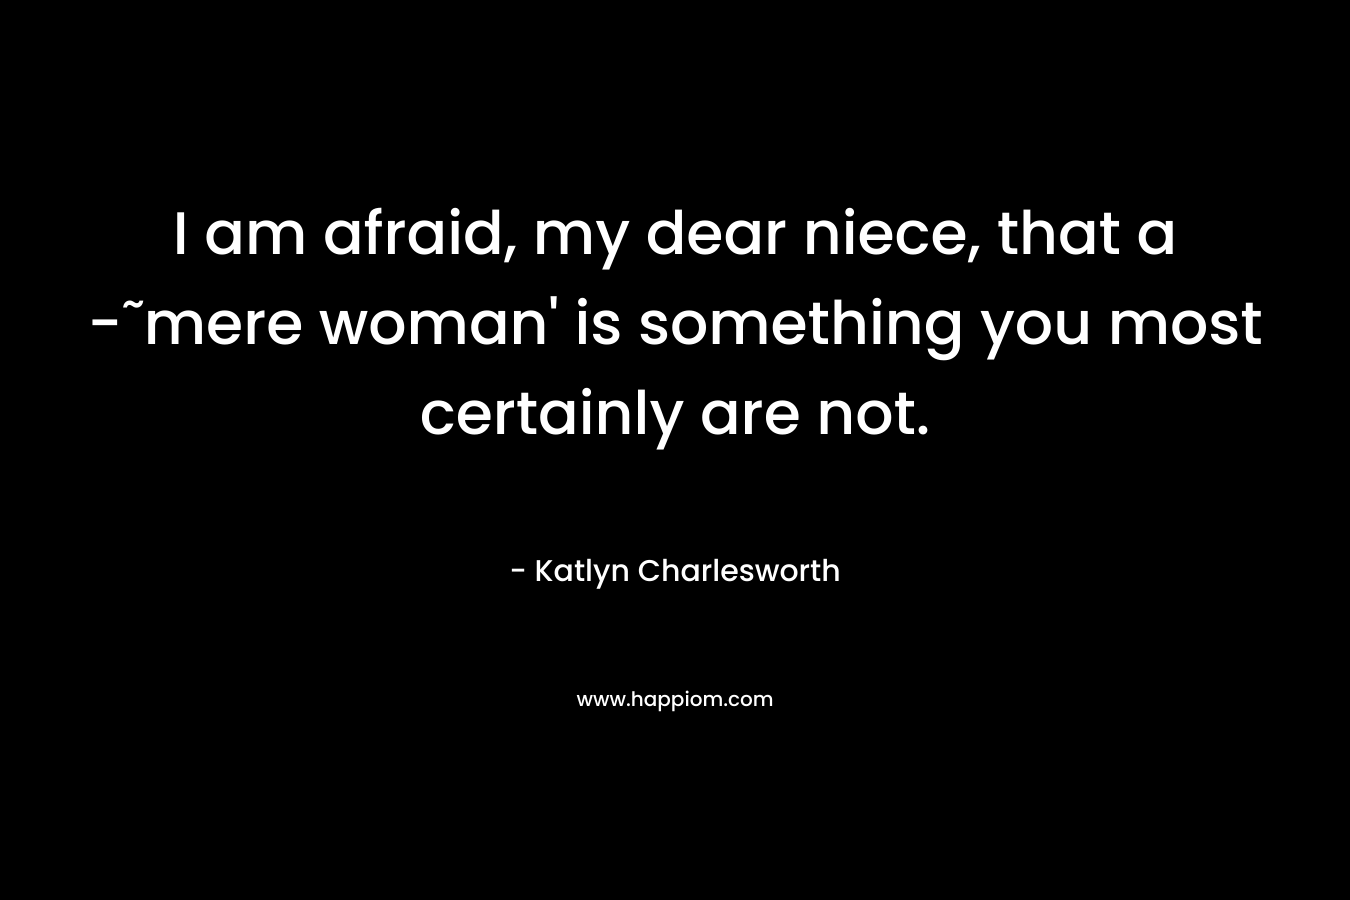 I am afraid, my dear niece, that a -˜mere woman' is something you most certainly are not.